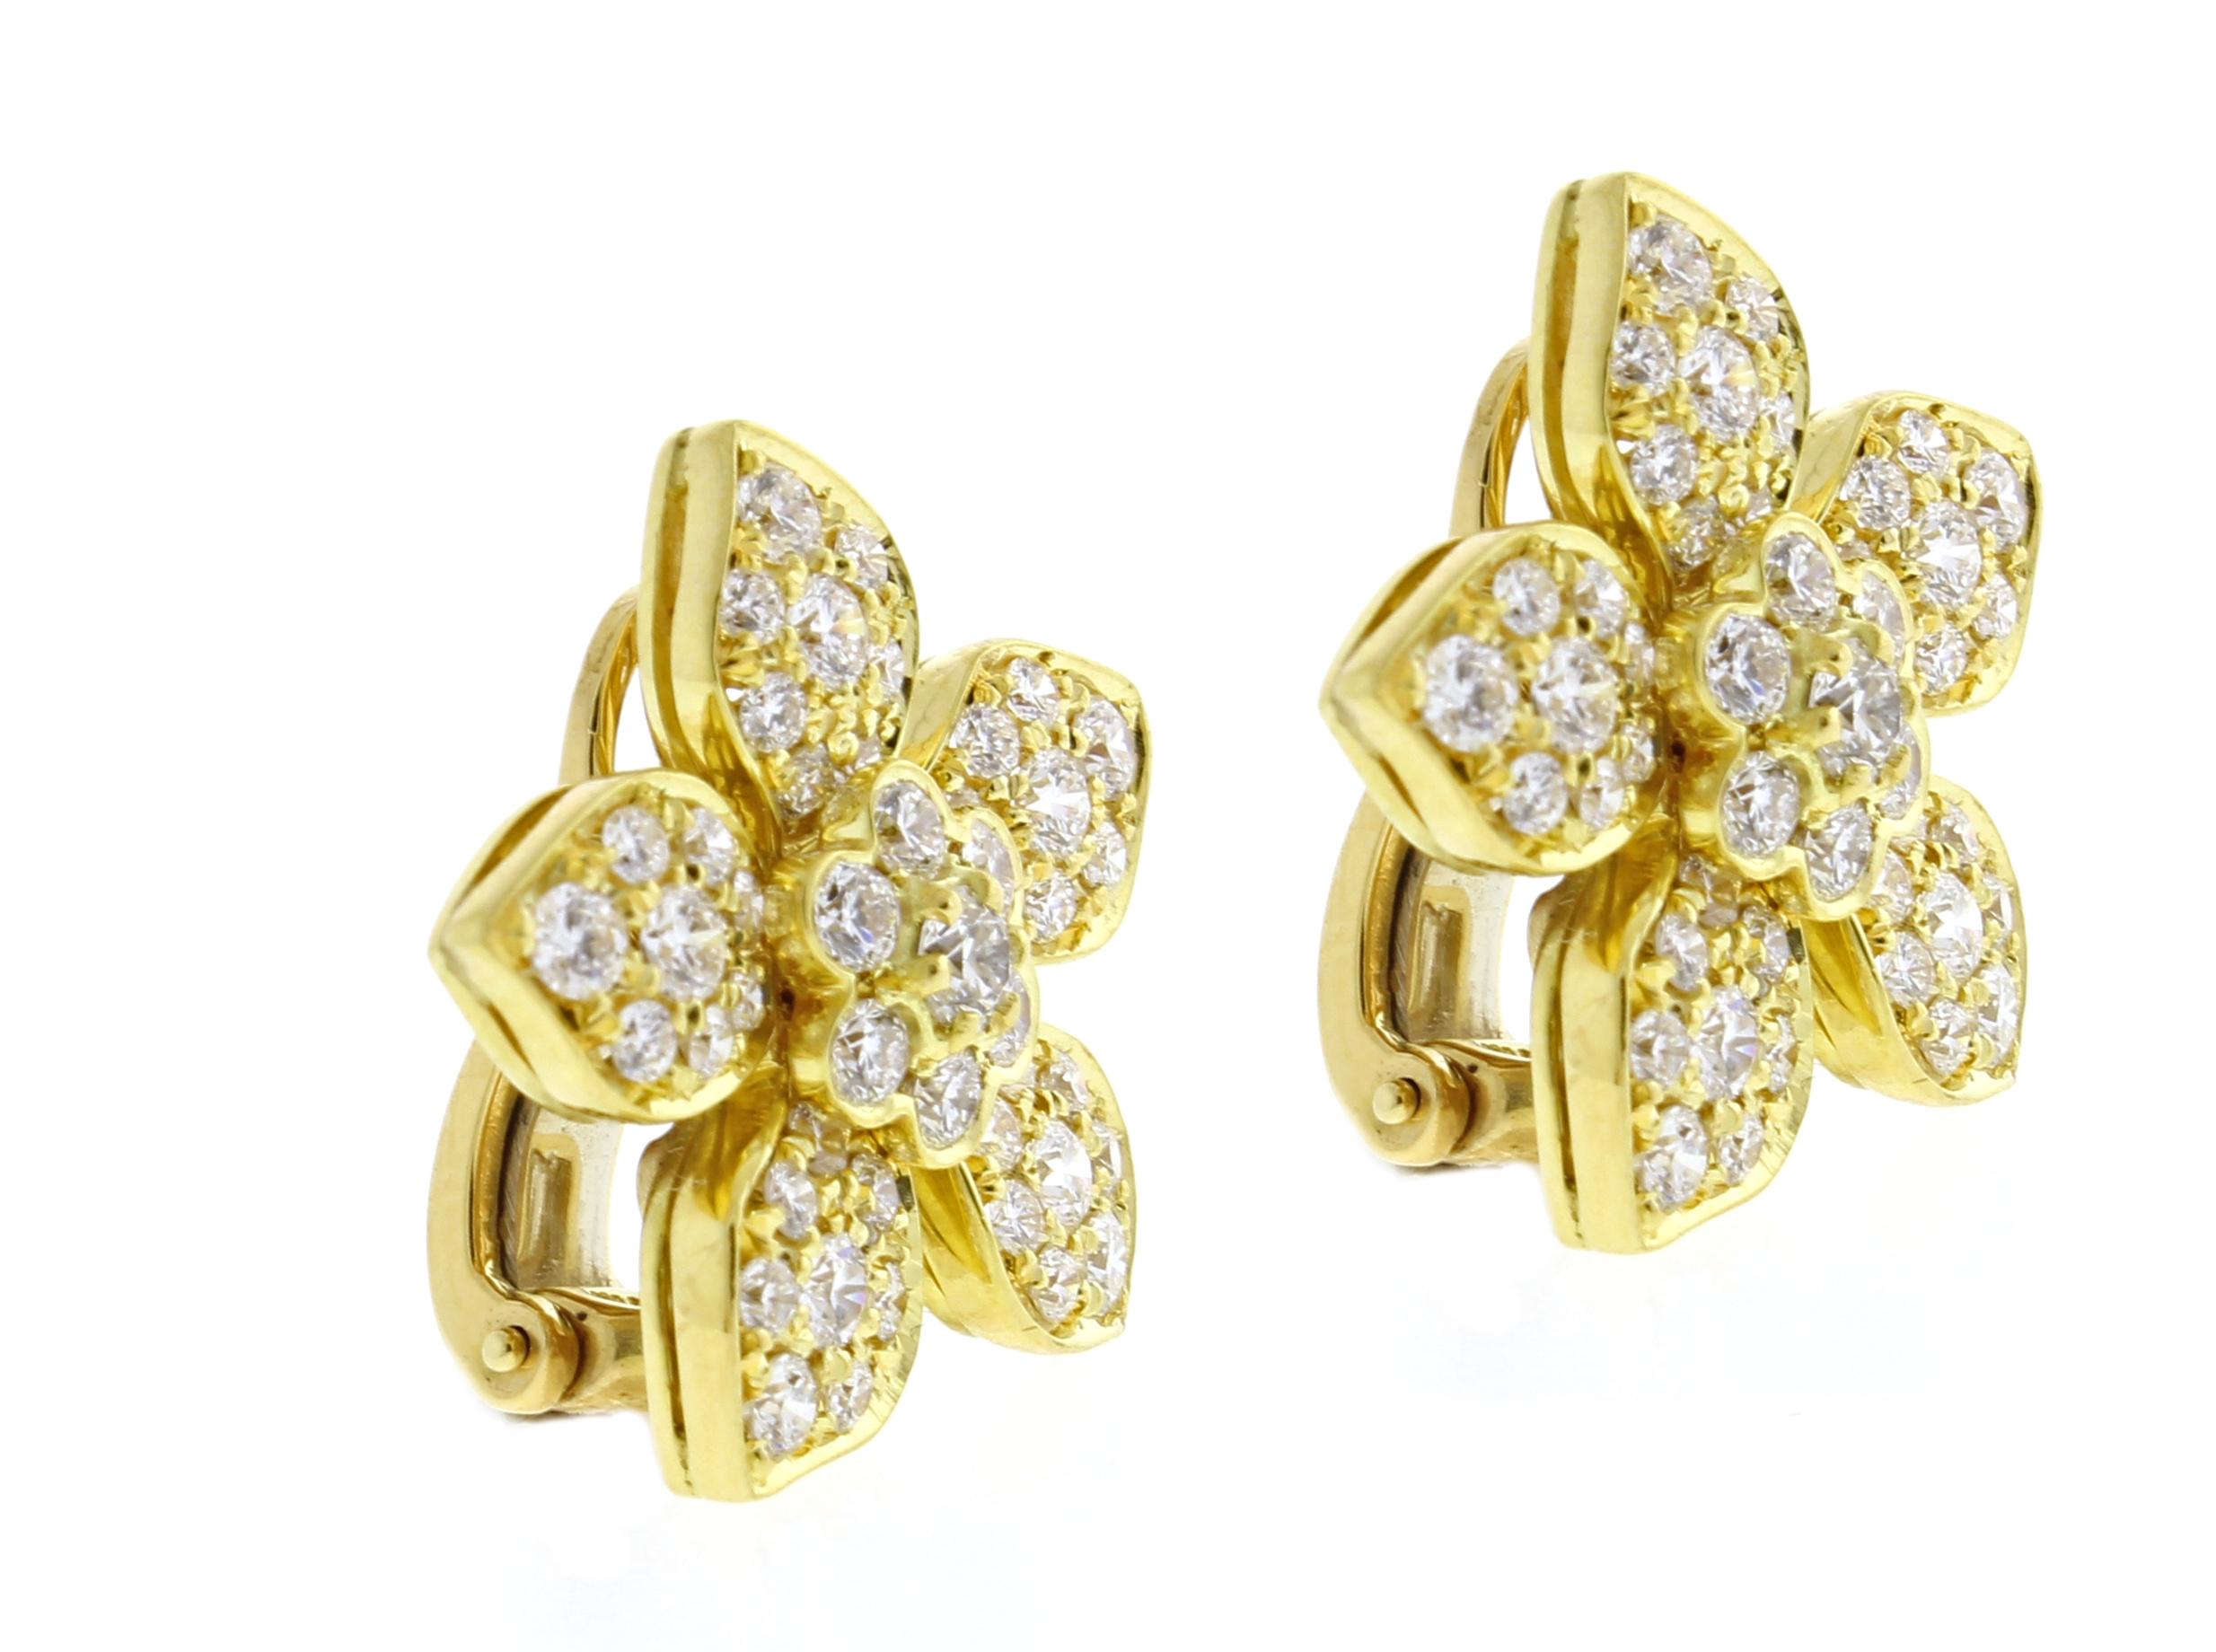 From Pampillonia Jewelers Fiore collection, a pair of diamond flower ear clips. The 18 karat gold earrings contain 94 brilliant diamonds weighing 2.39 carats.
♦ Designer: Pampillonia
♦ Metal: 18 karat
♦ 5/8 of an inch wide
♦ Circa 2023
♦ Packaging: